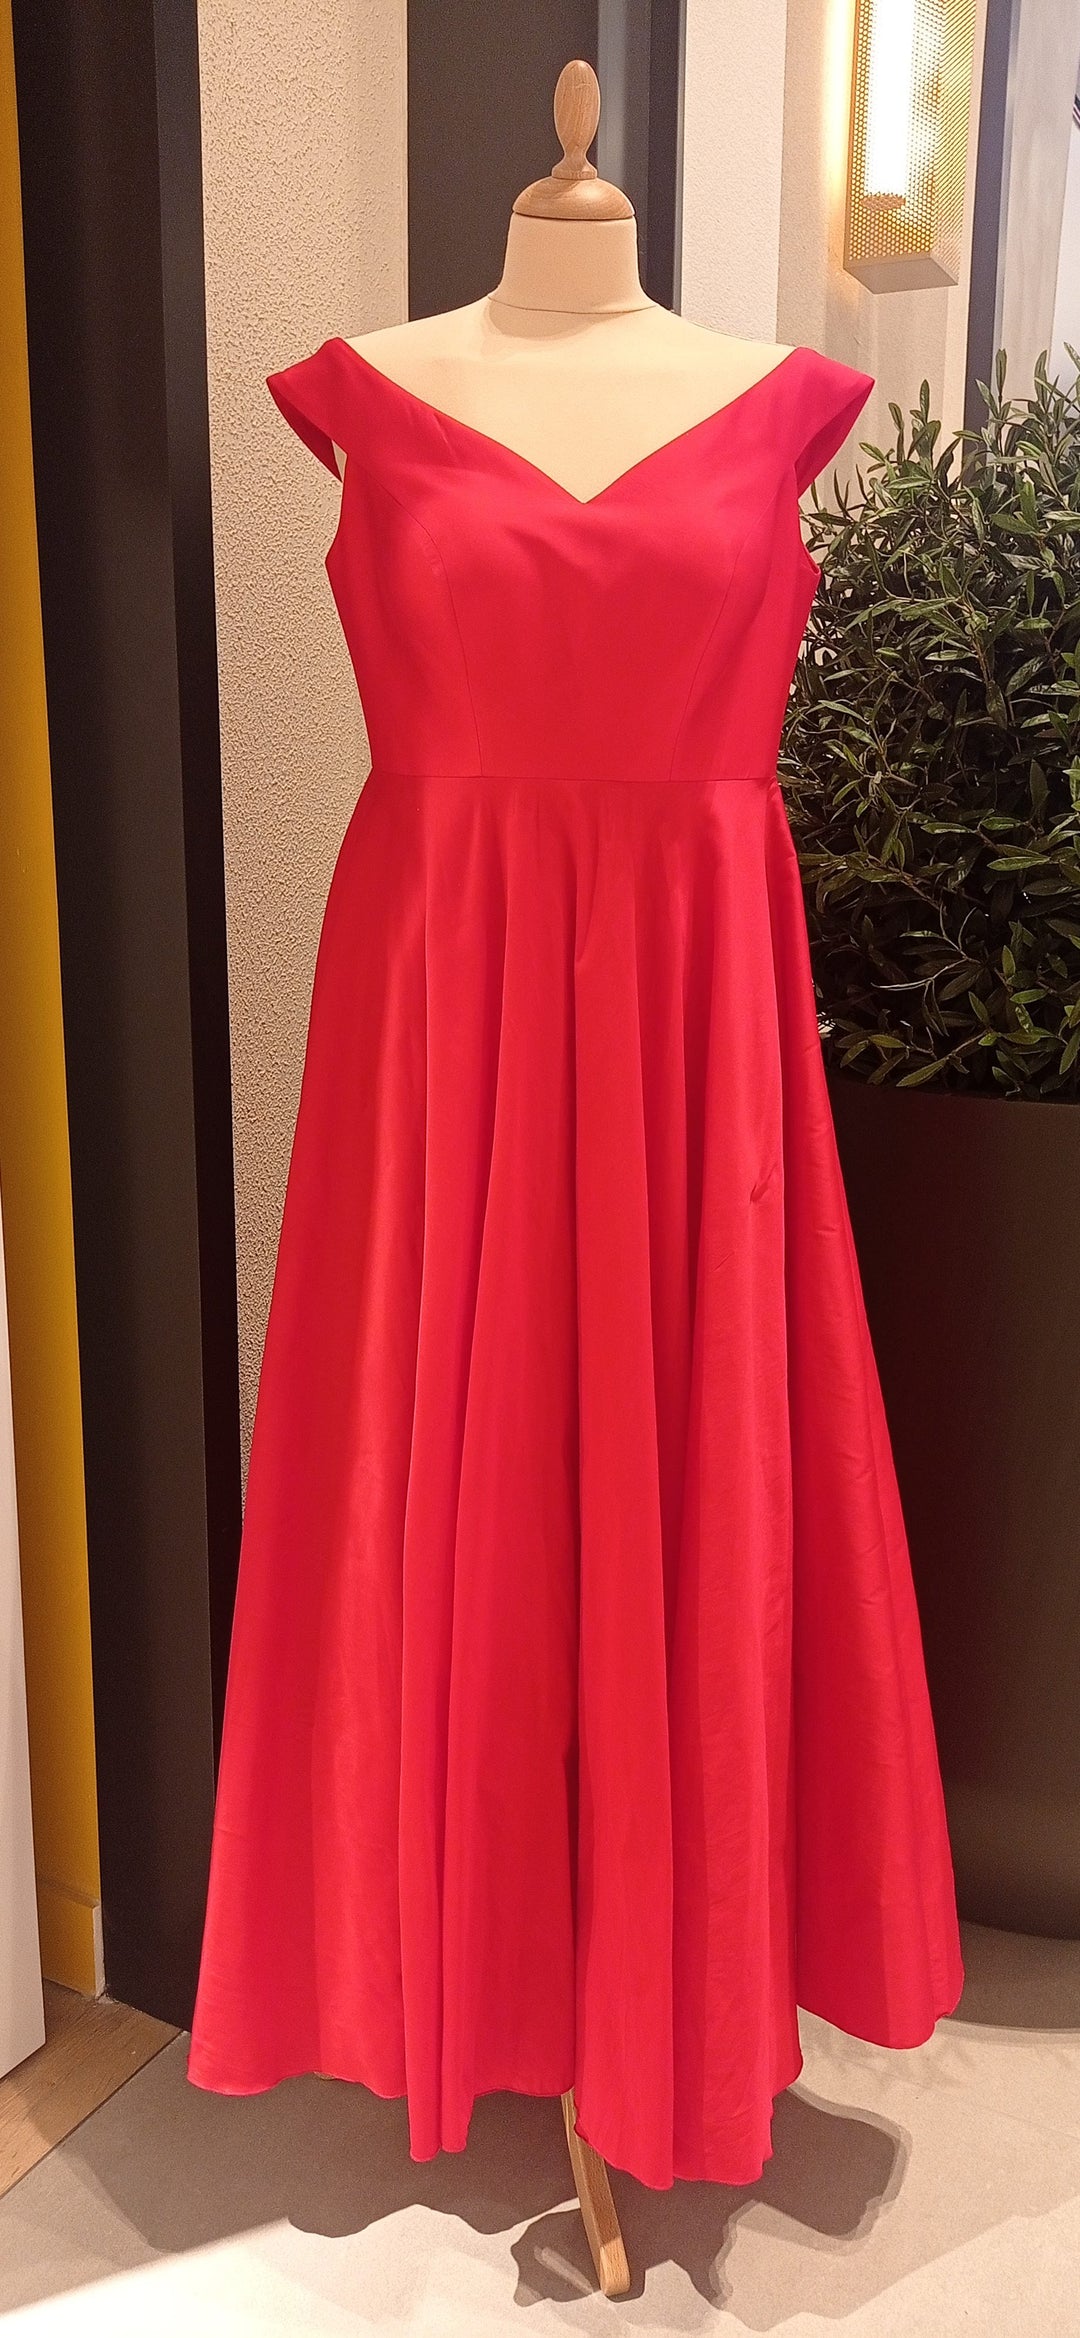 Aronia Red Romantic Evening Gown